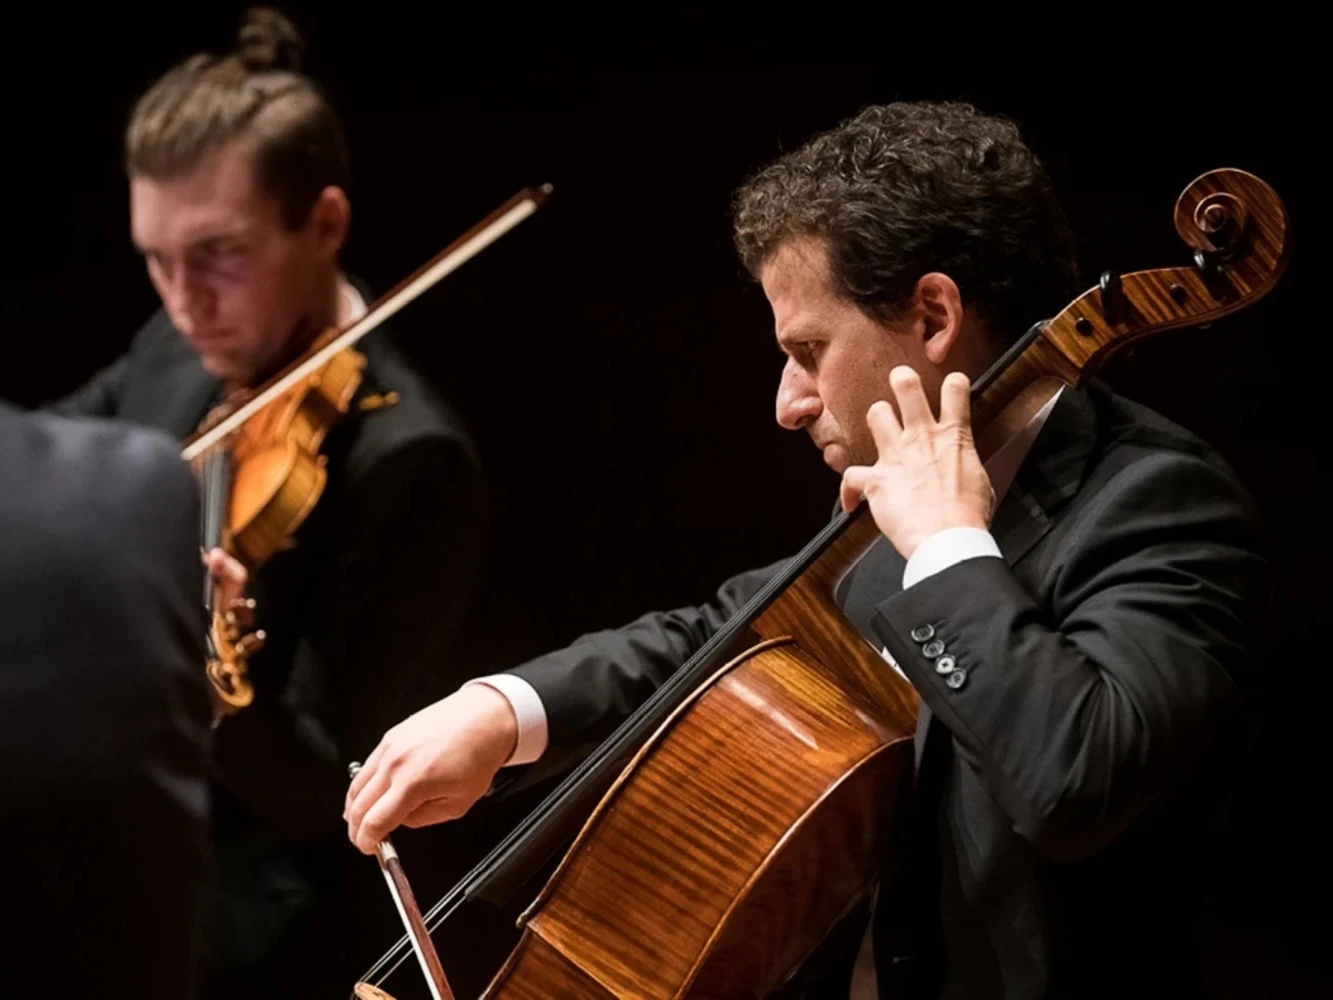 The Chamber Music Society of Lincoln Center: Instrumental Array: What to expect - 1